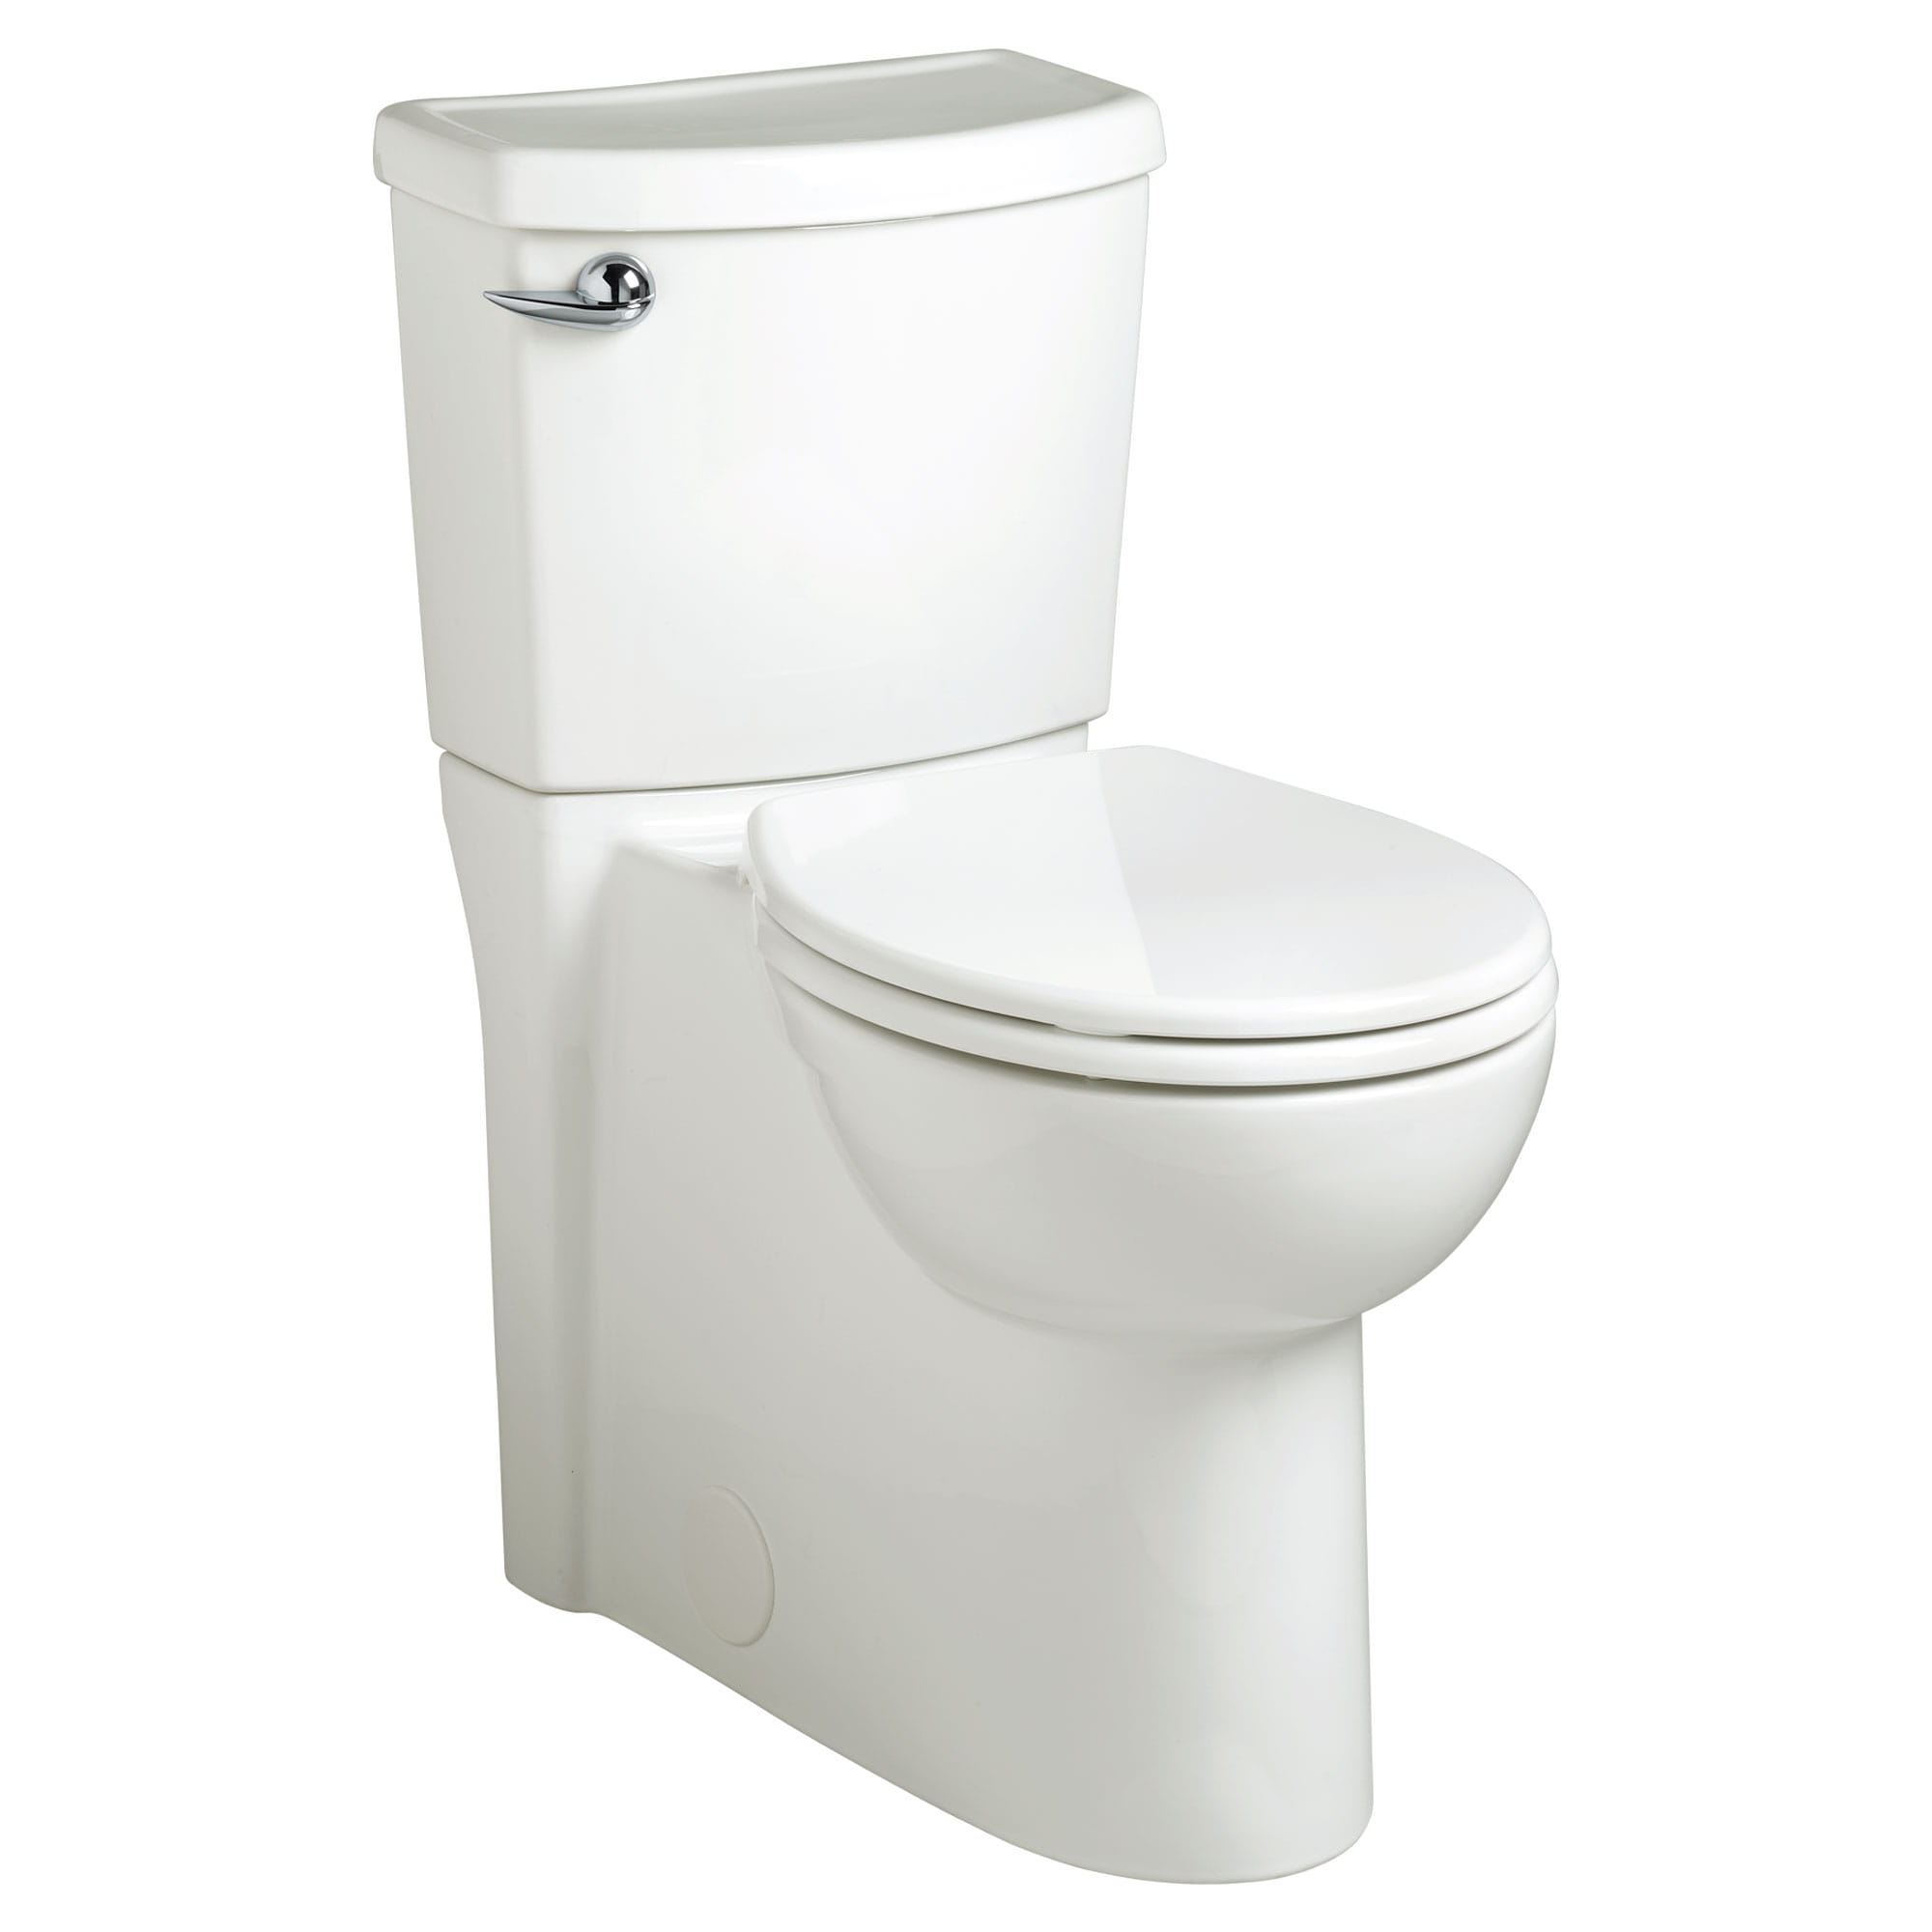 Cadet®3 FloWise™ Skirted Two-Piece 1.28 gpf/4.8 Lpf Chair Height Elongated Toilet With Seat